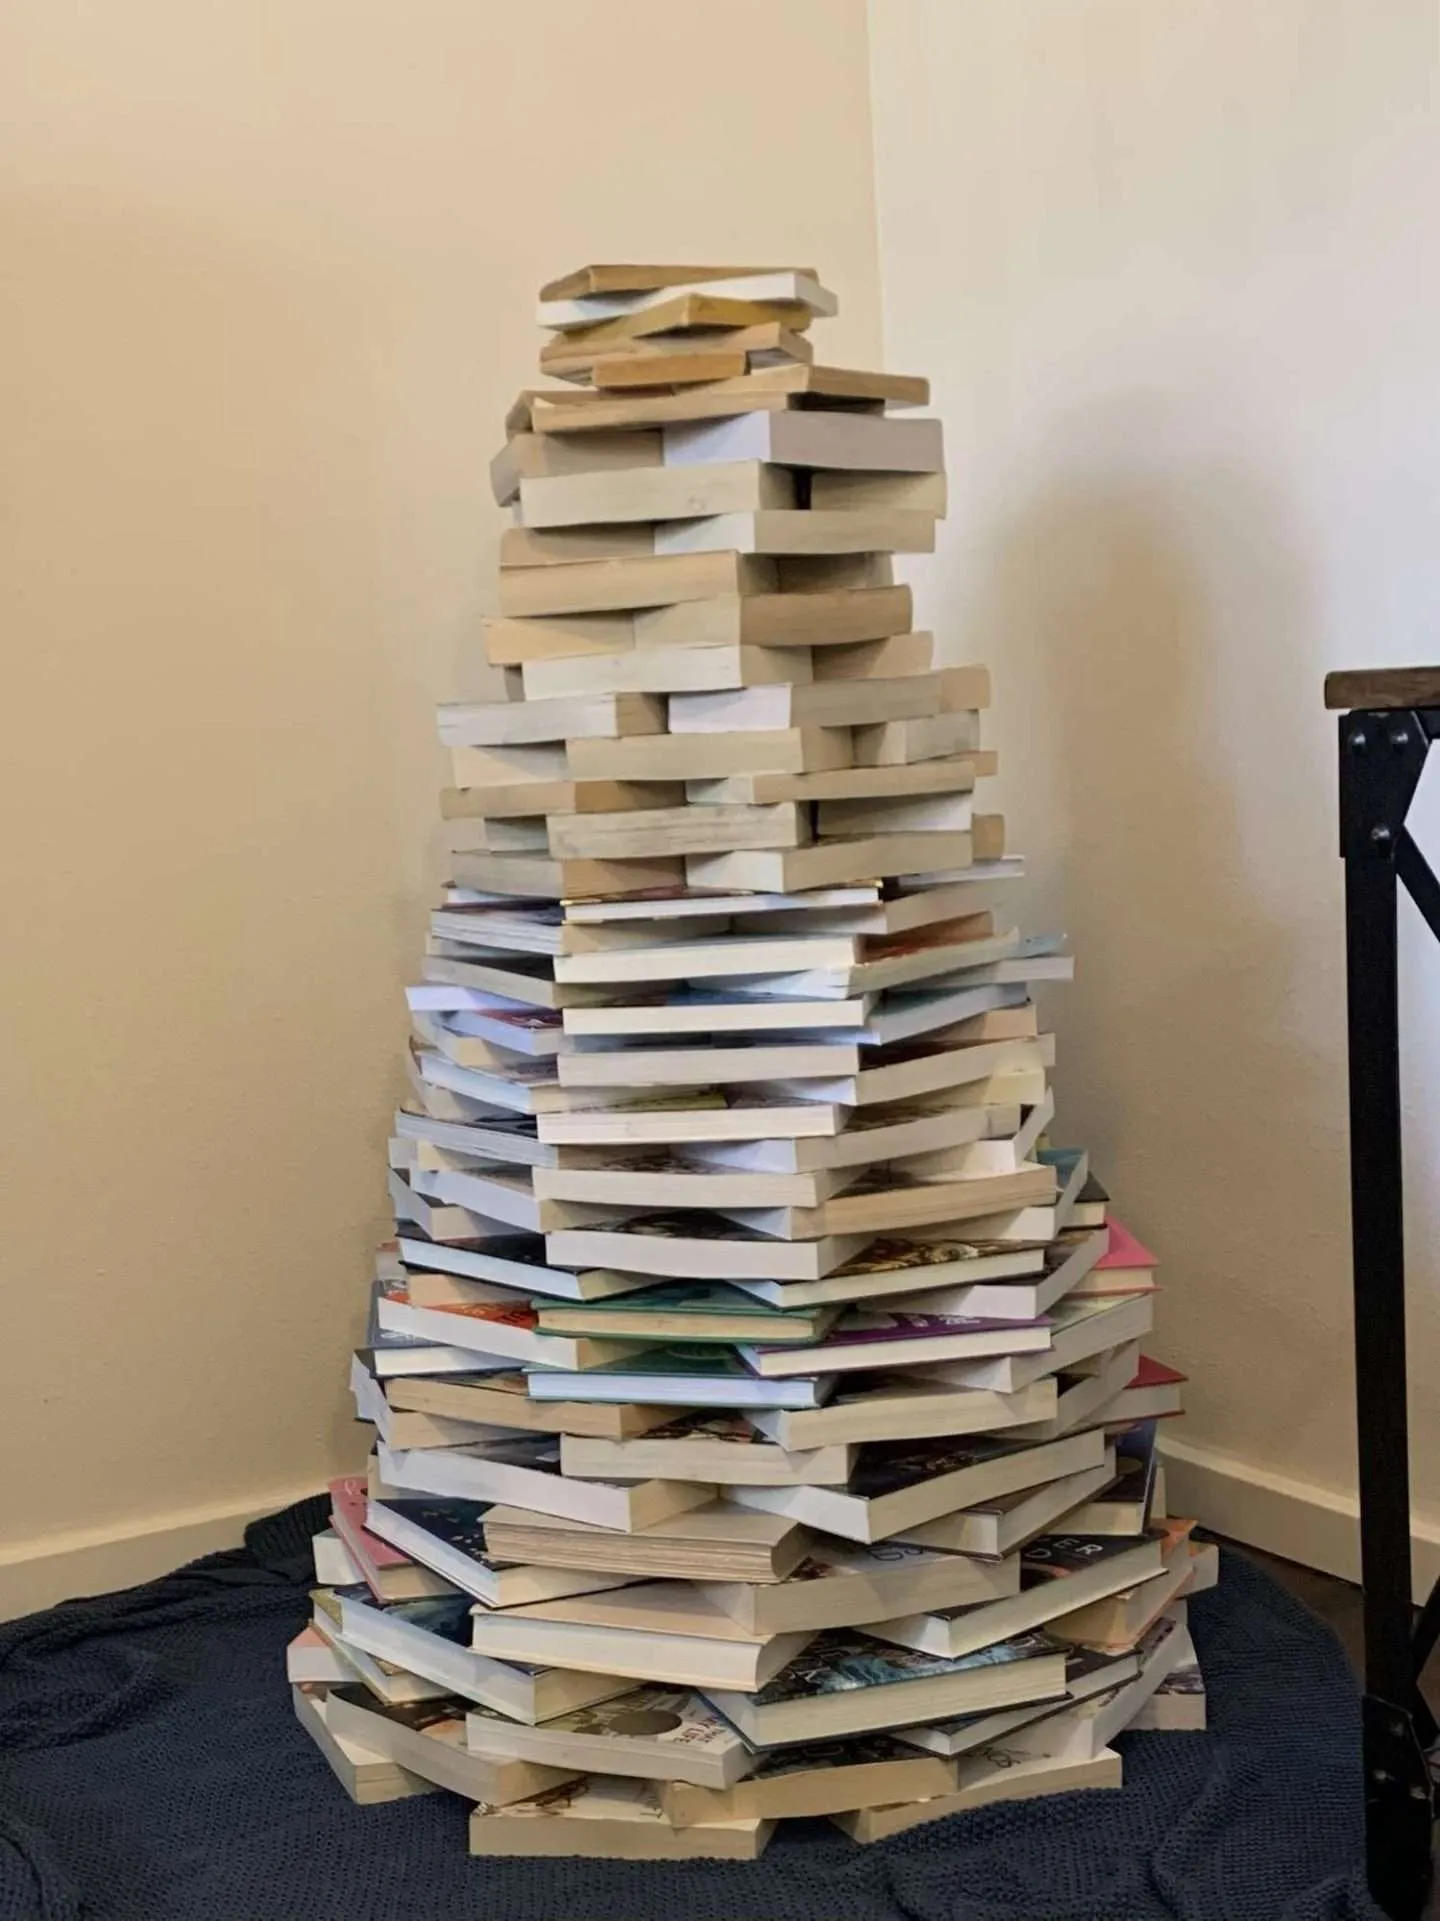 How to make a Christmas tree out of books.